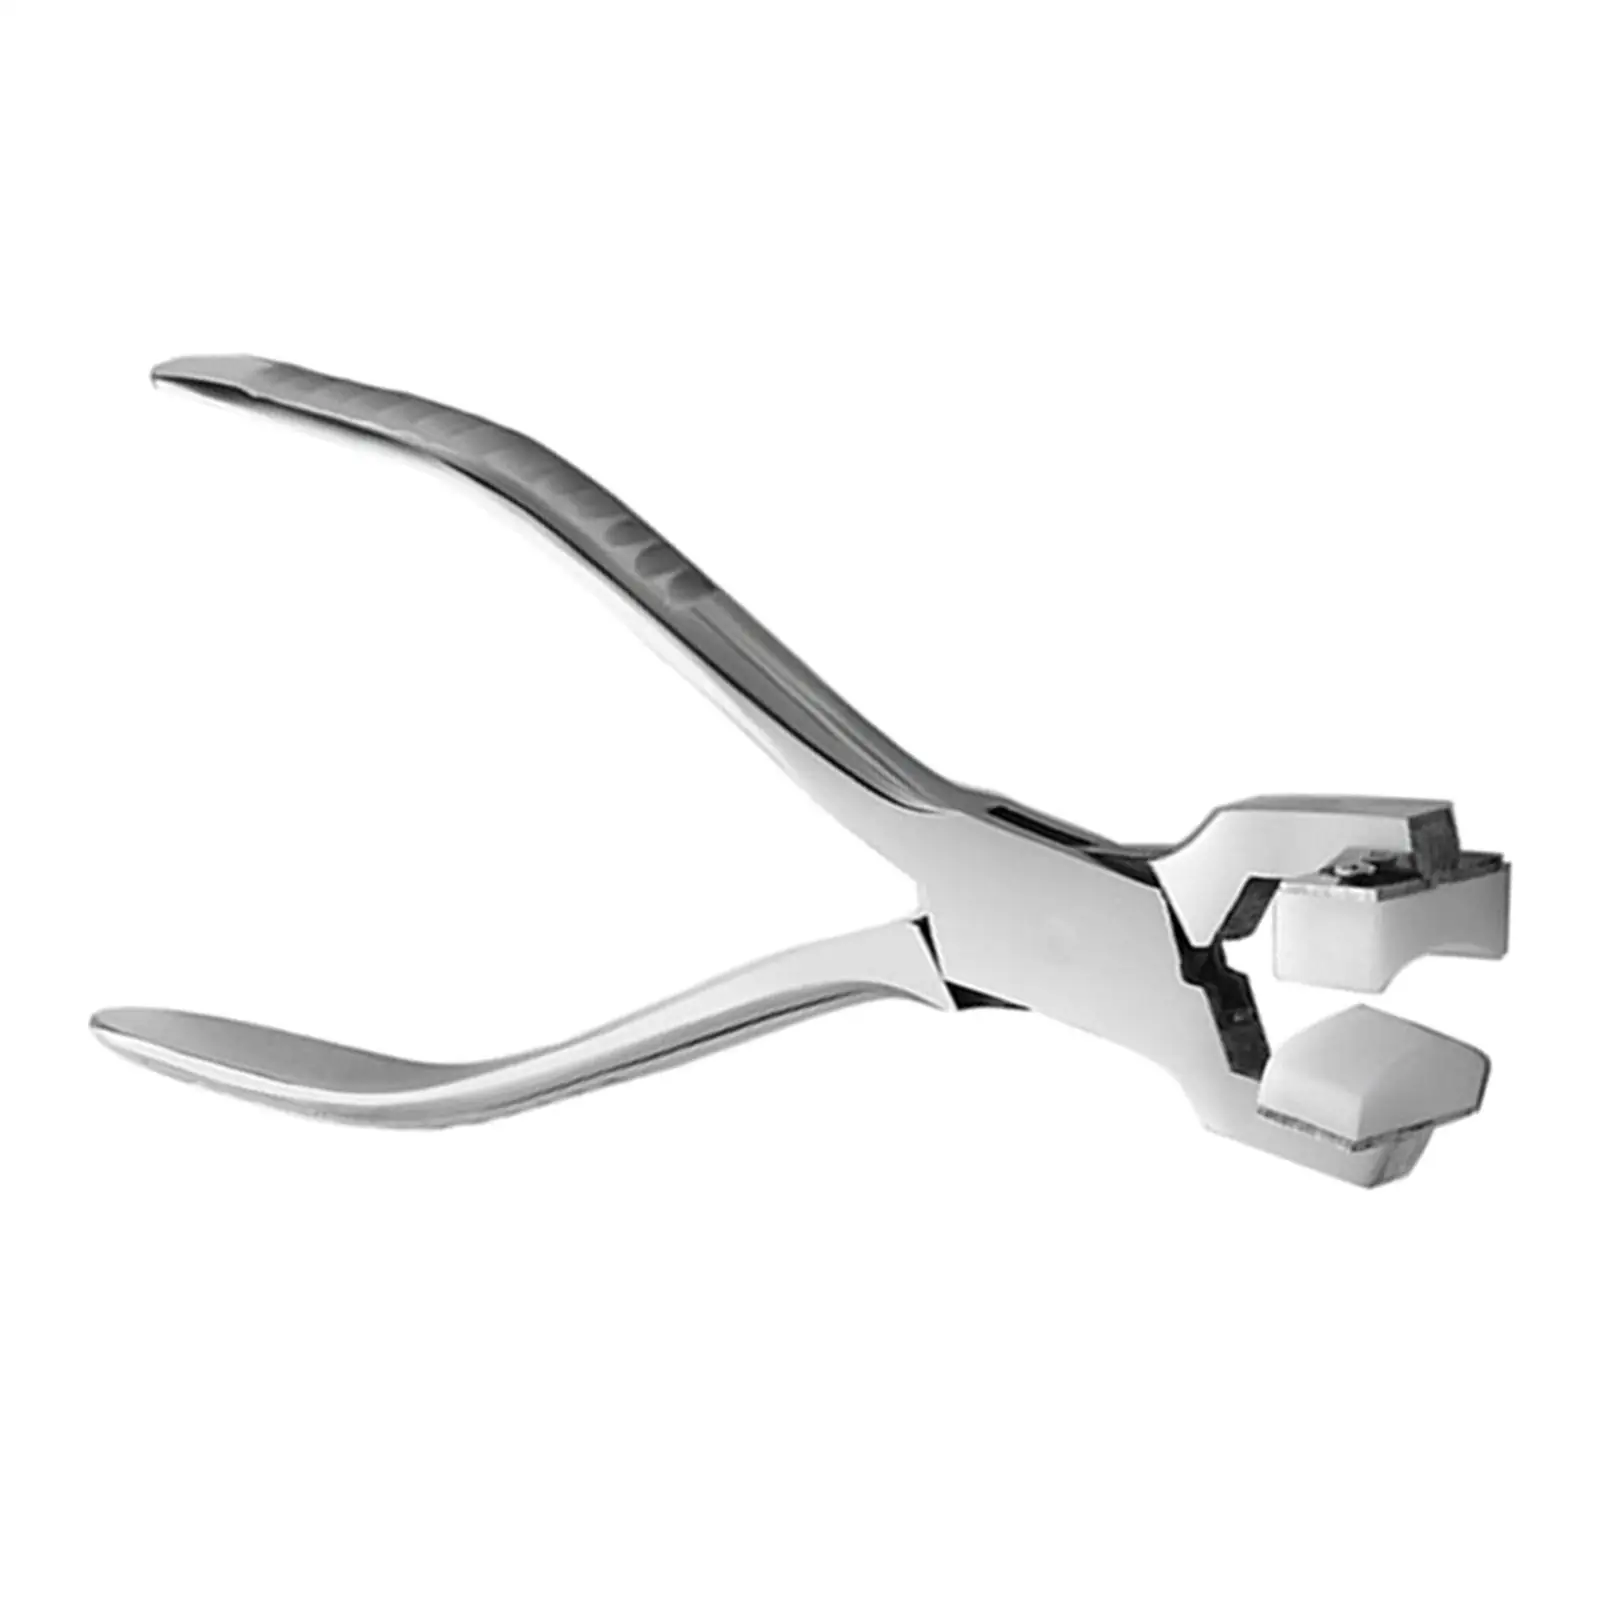 Portable Bracelet Pliers Jewelry Making Ring Bending Curving DIY Professional Stainless Steel Craft Bangle Tool Supplies